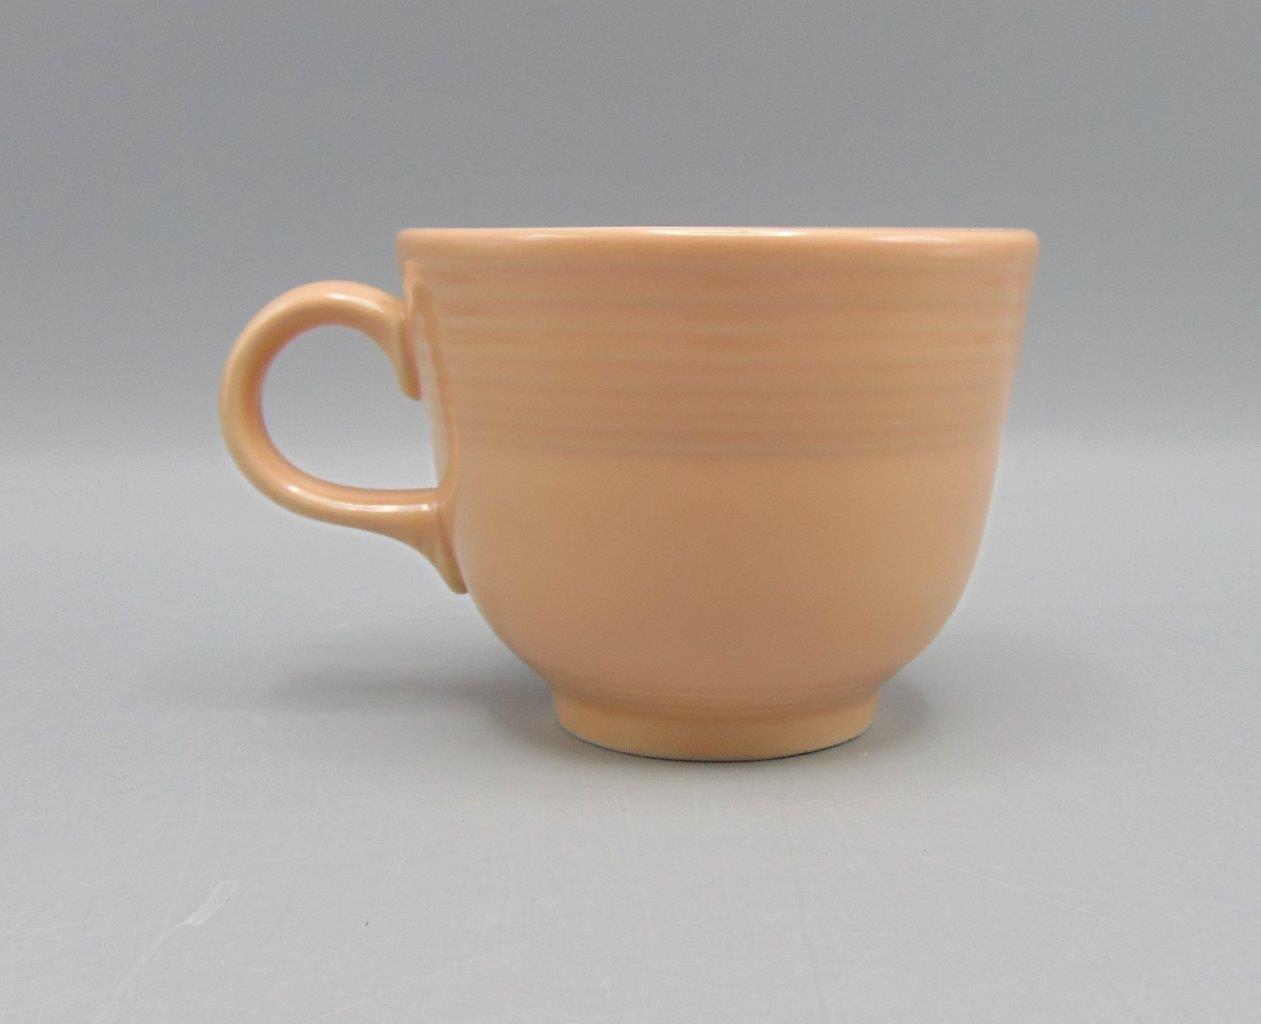 P86 Fiestaware Apricot Cup & Saucer